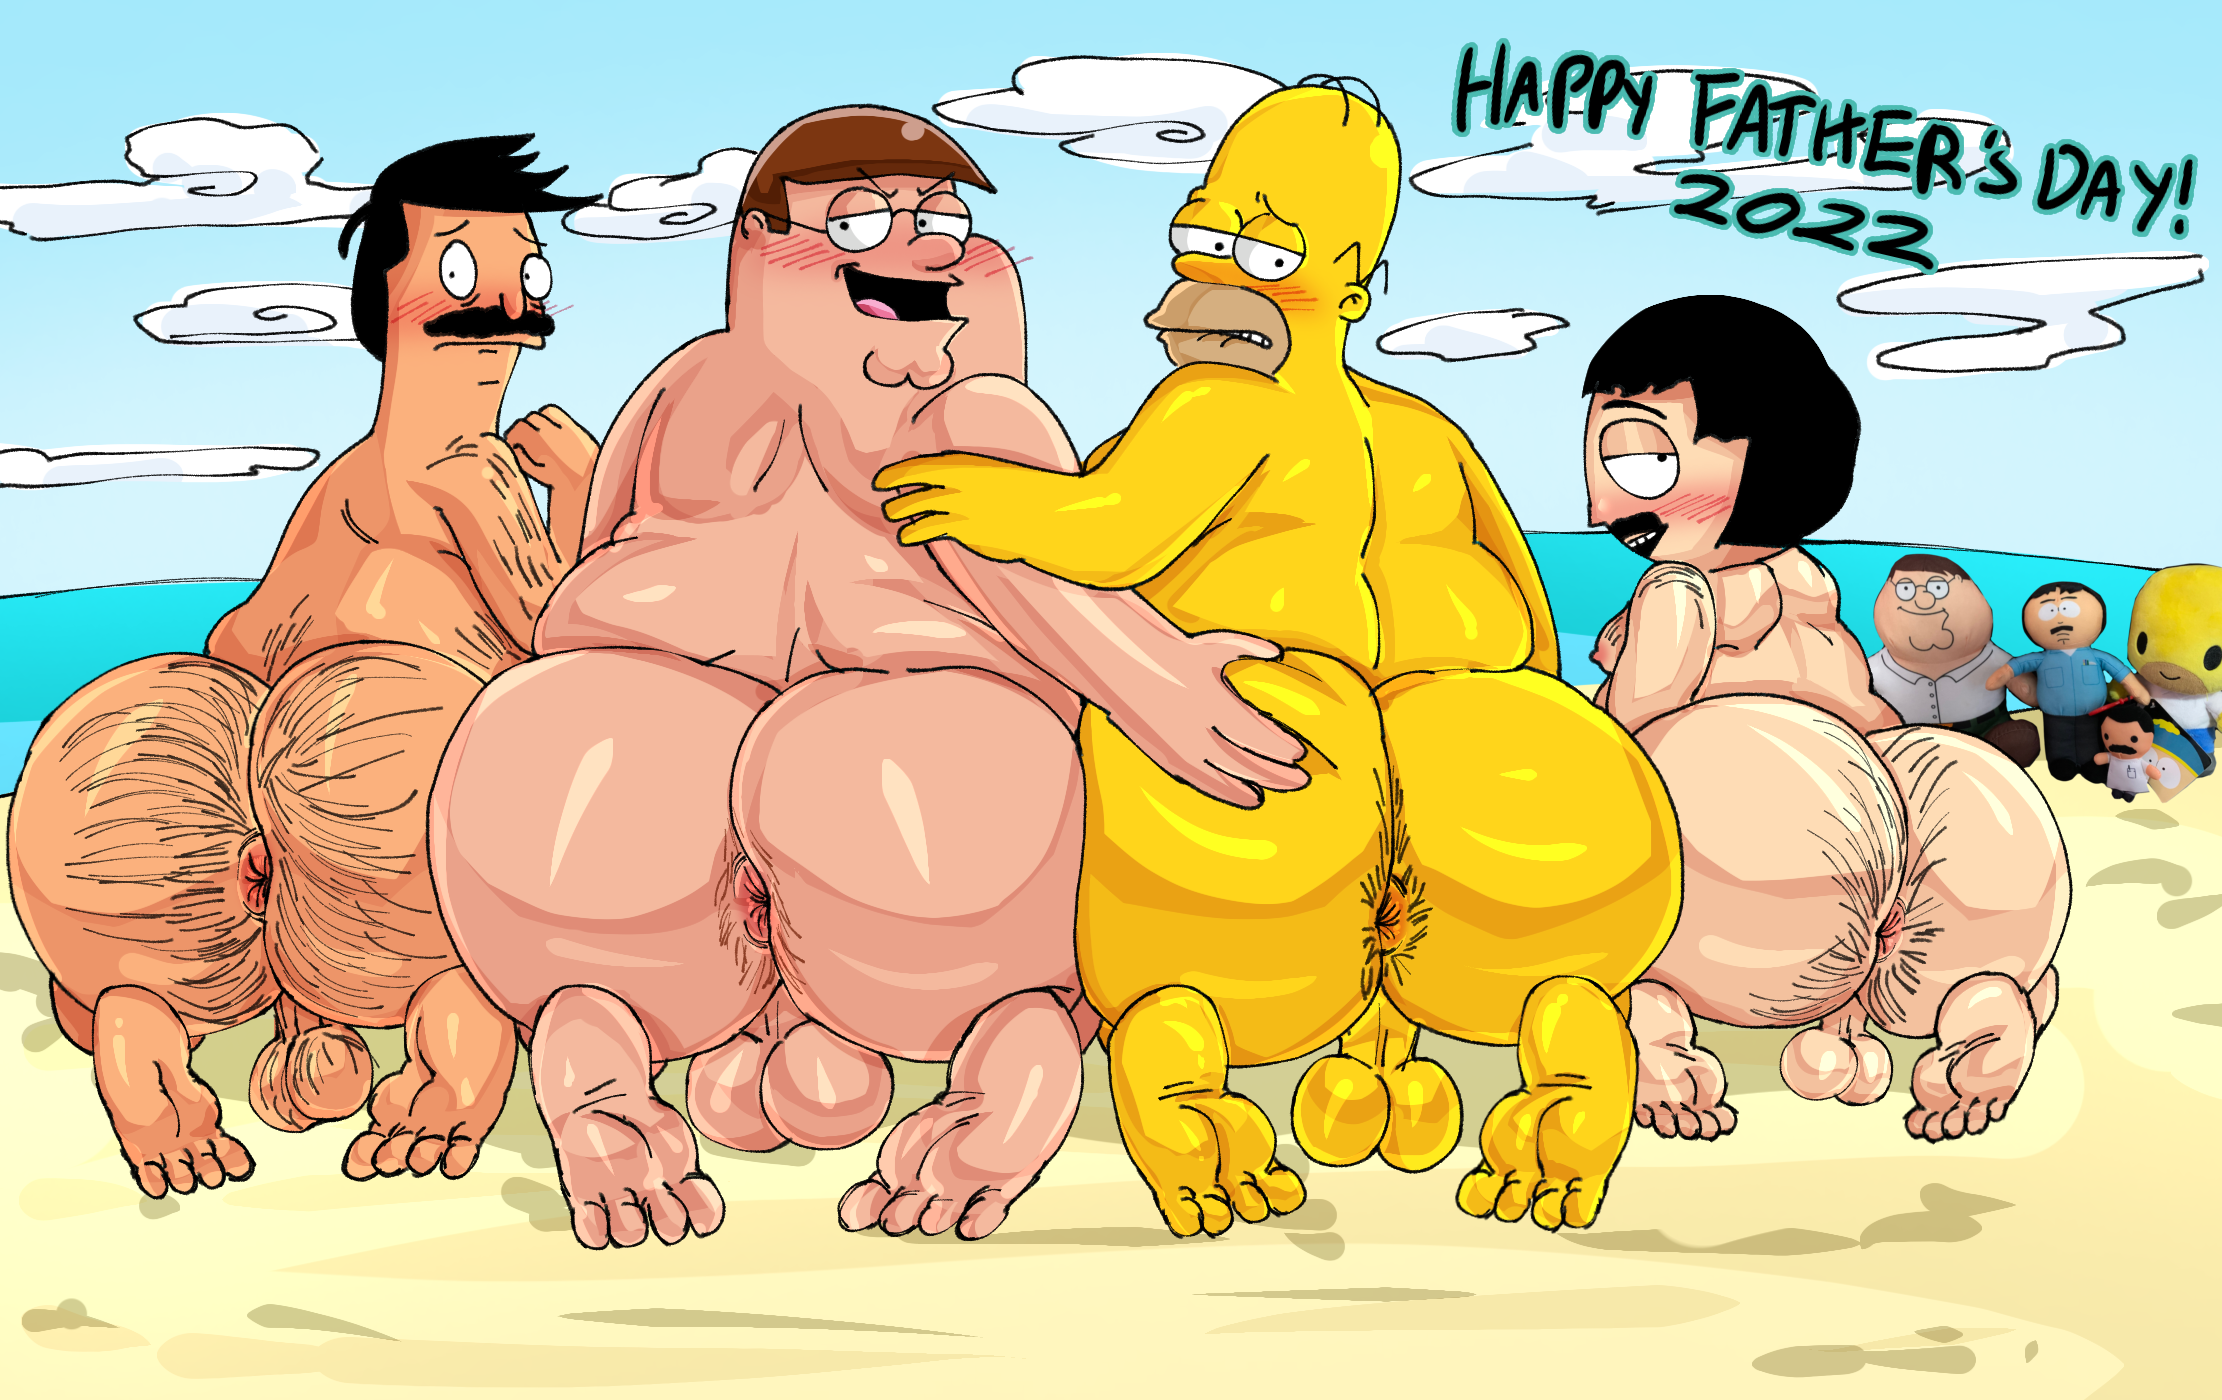 Simpsons Family Guy Porn Ass - Rule34 - If it exists, there is porn of it / bob belcher, homer simpson,  peter griffin, randy marsh / 5915775